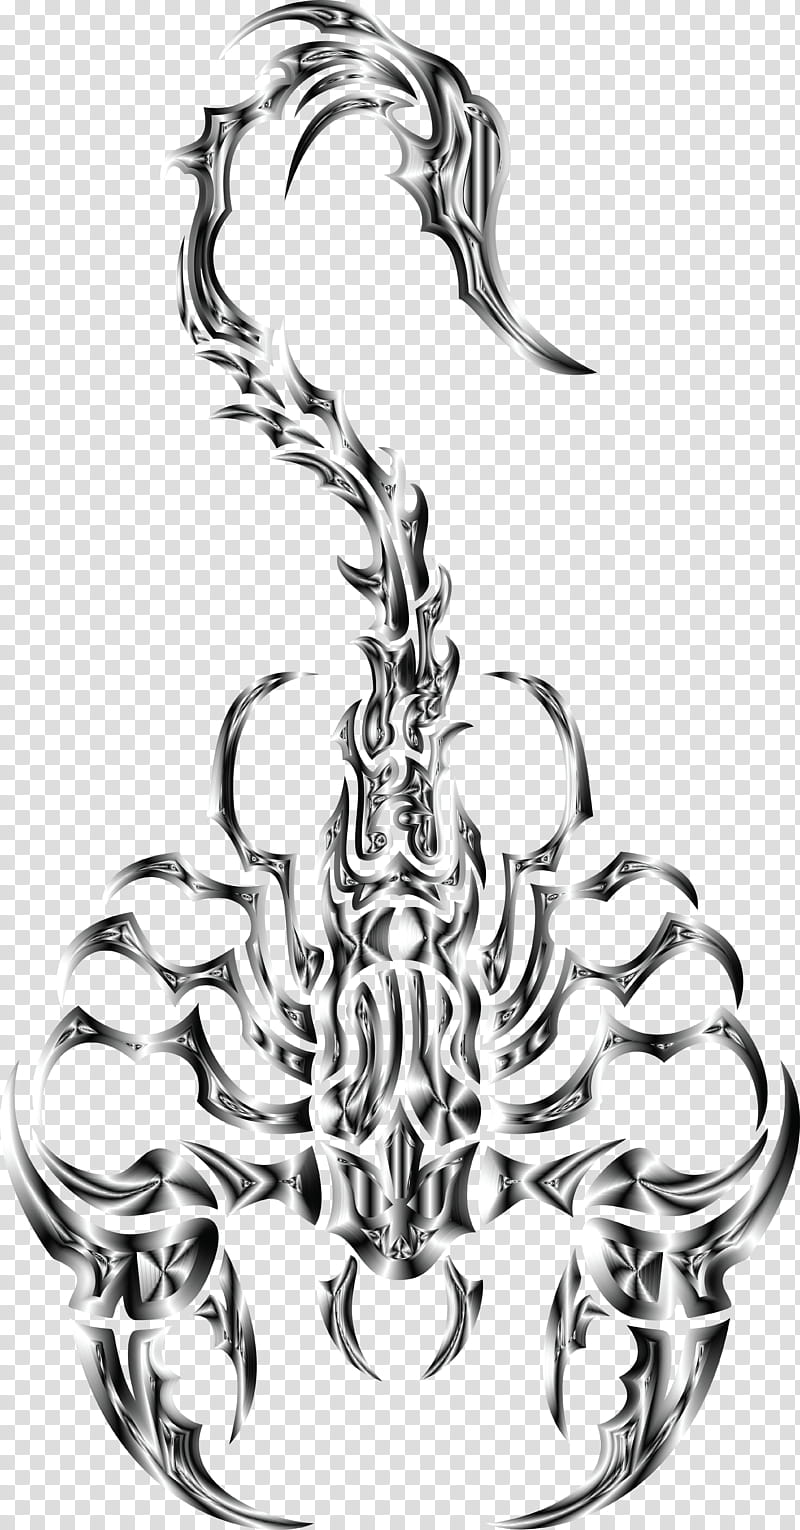 Desktop Icon, Scorpion, Tattoo Art, Drawing, Arachnid, Icon Design, Black And White
, Body Jewelry transparent background PNG clipart